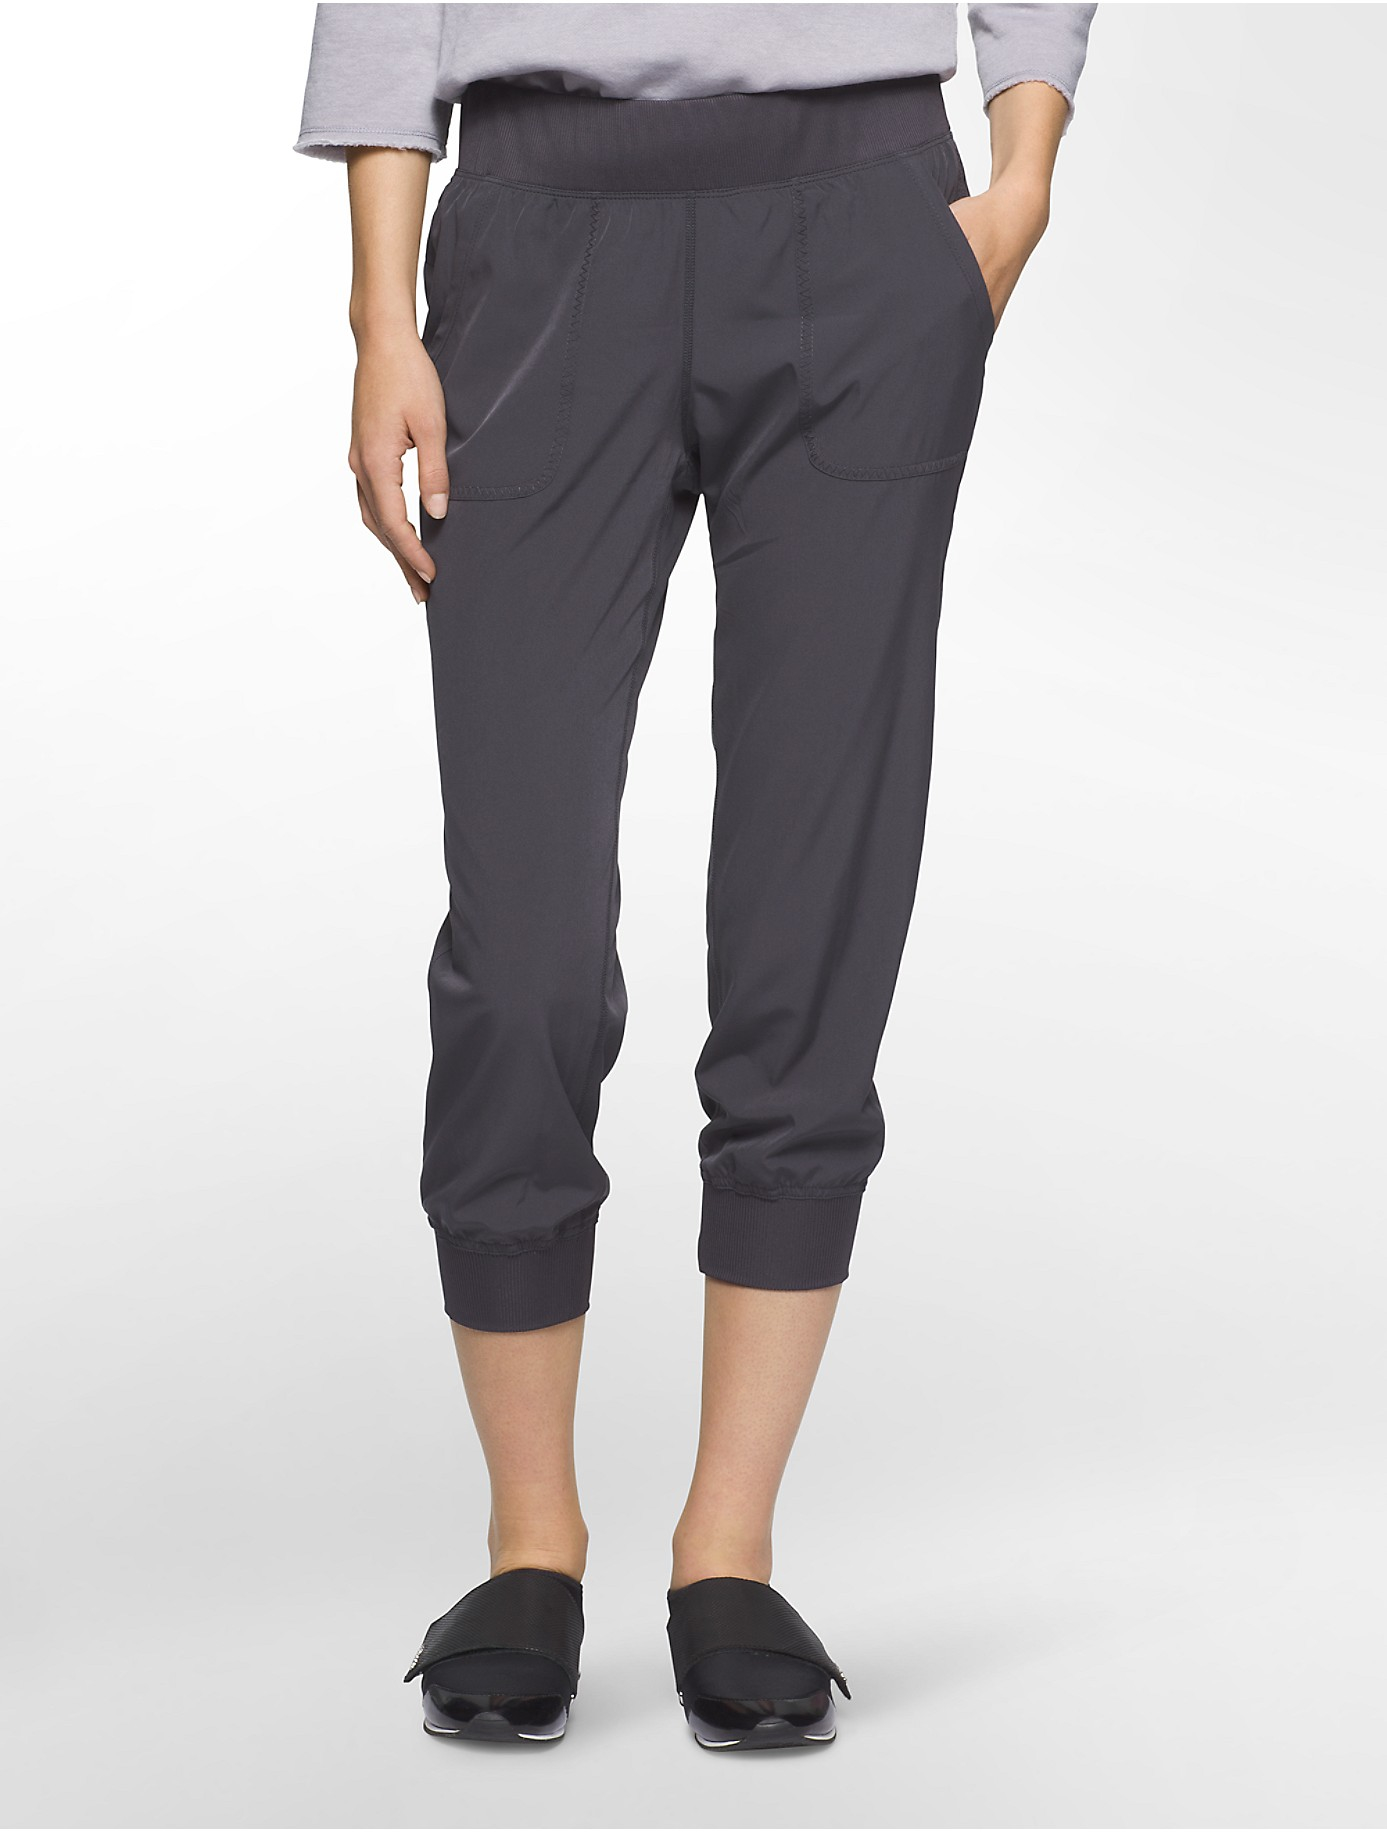 Lyst - Calvin Klein White Label Performance Banded Ankle Crop Pants in Gray